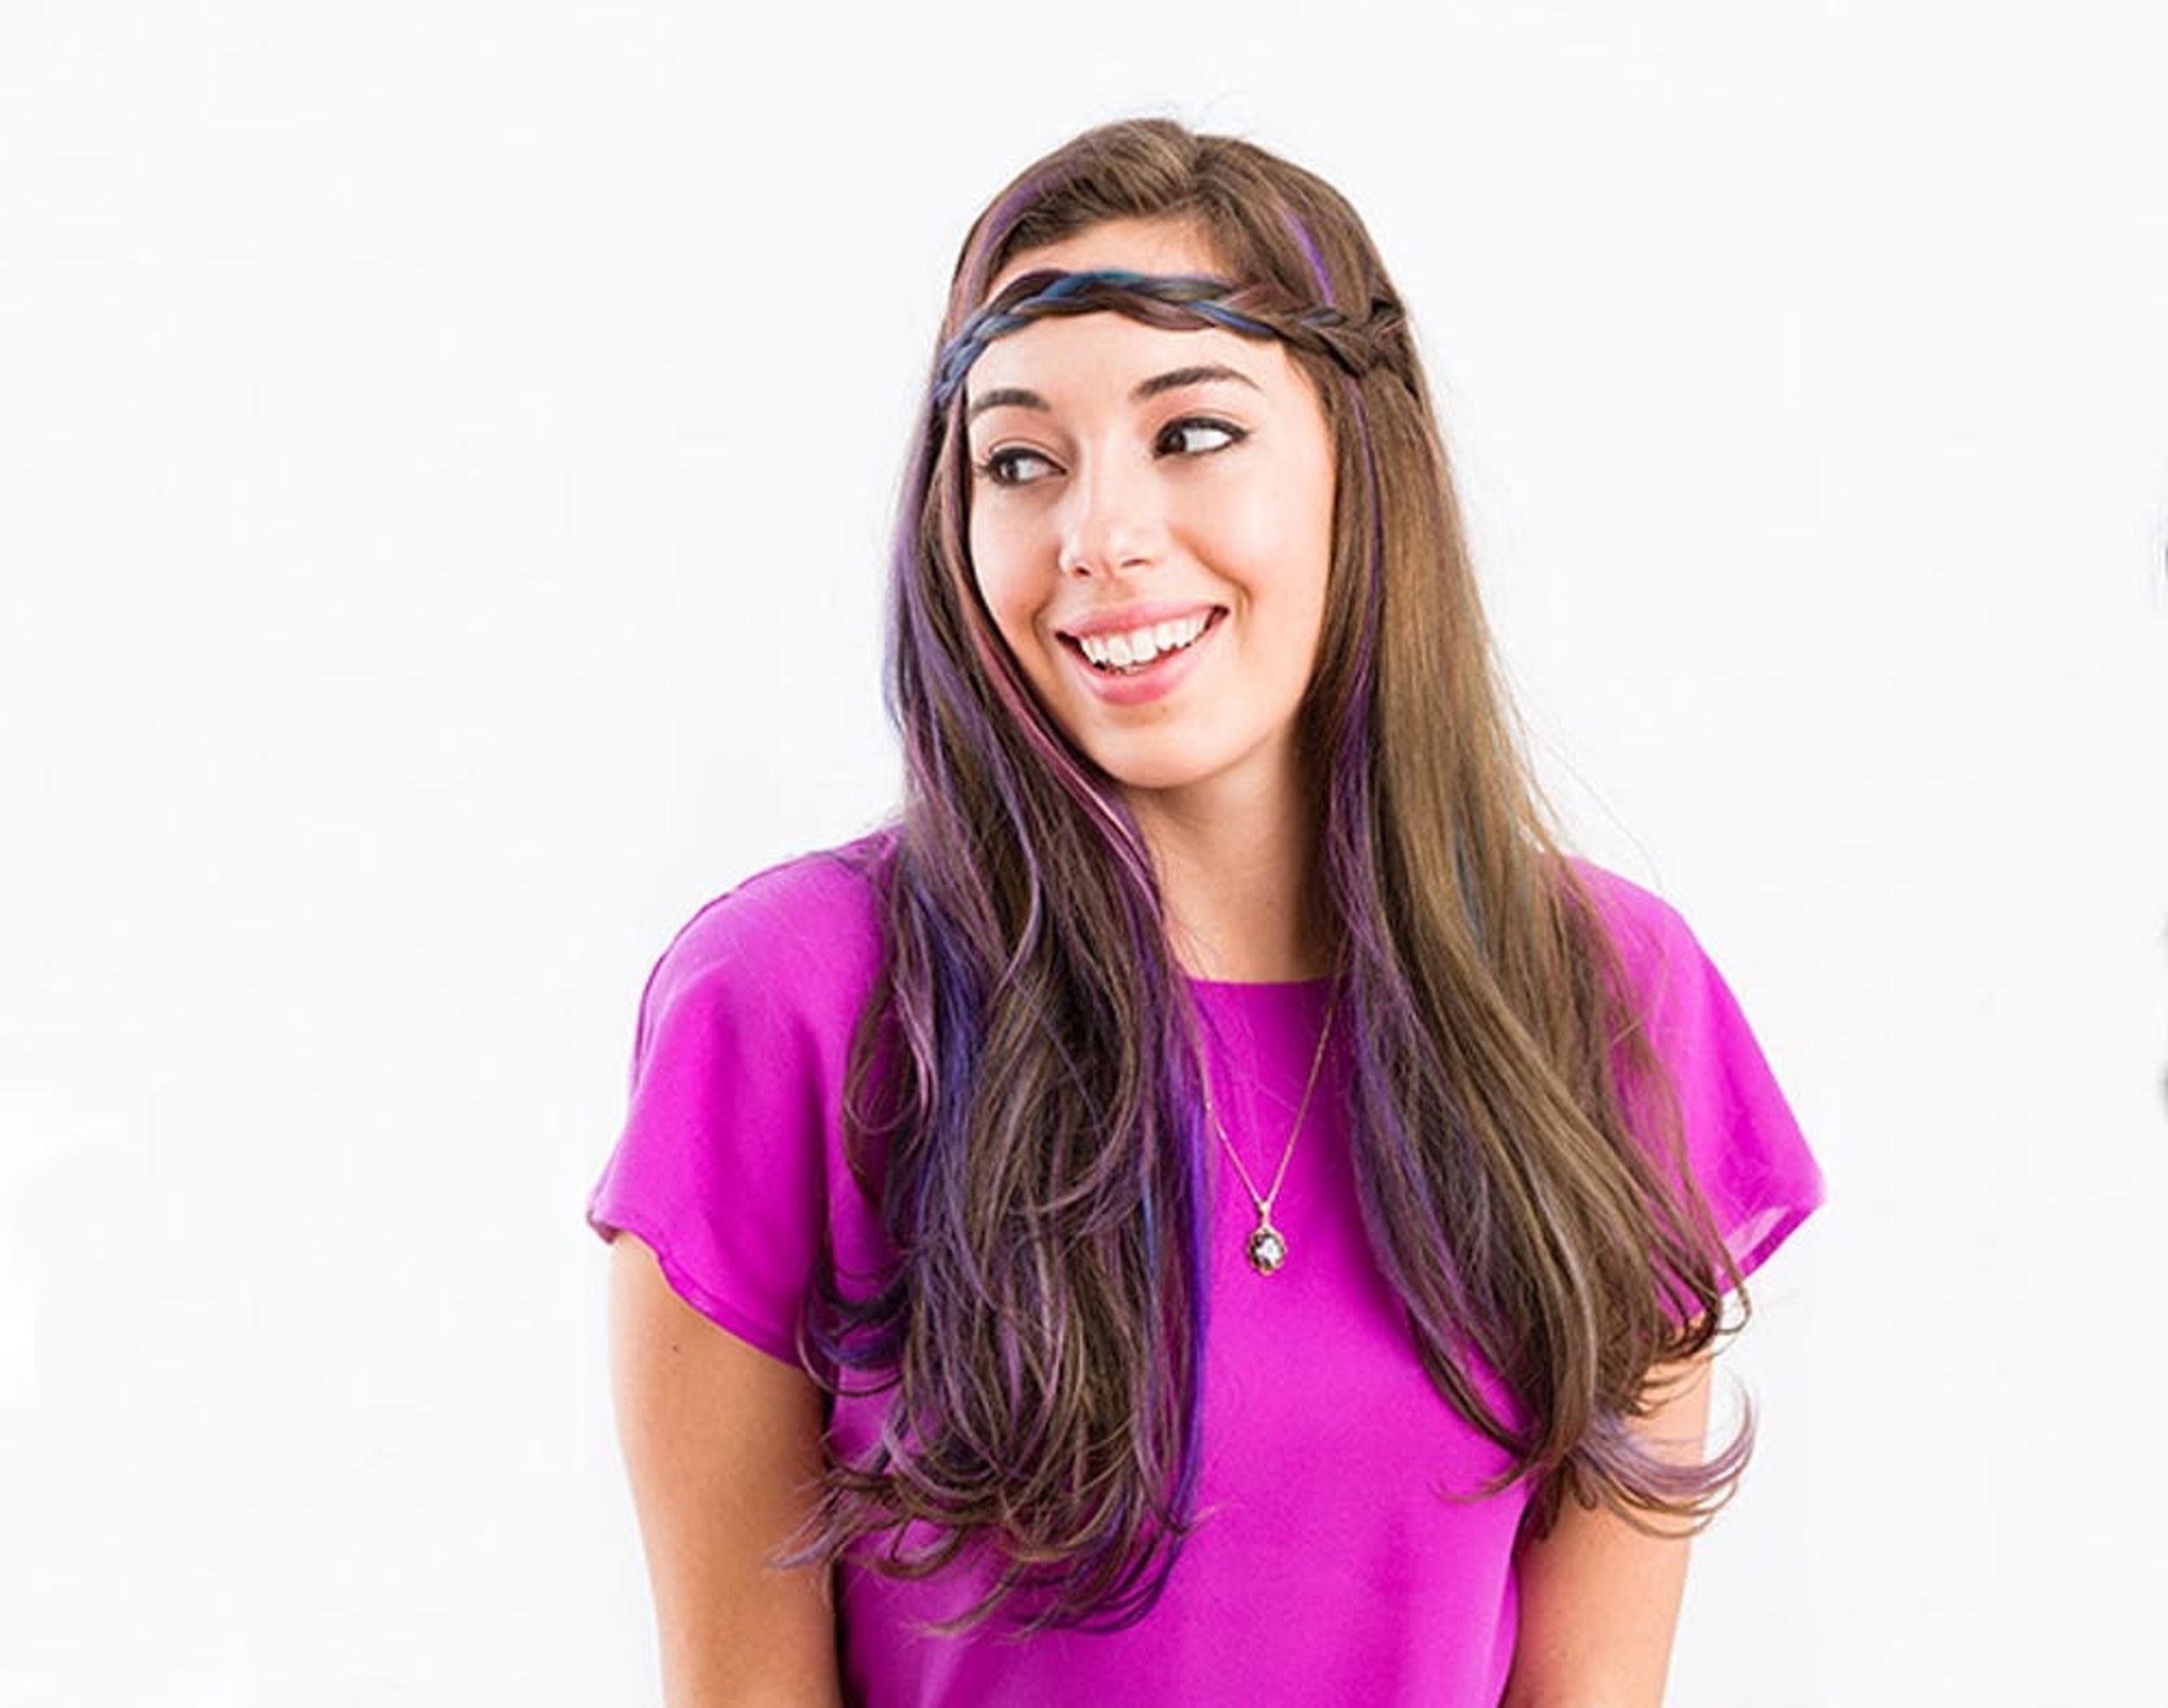 17 Ways to Make a Headband With Your Own Hair